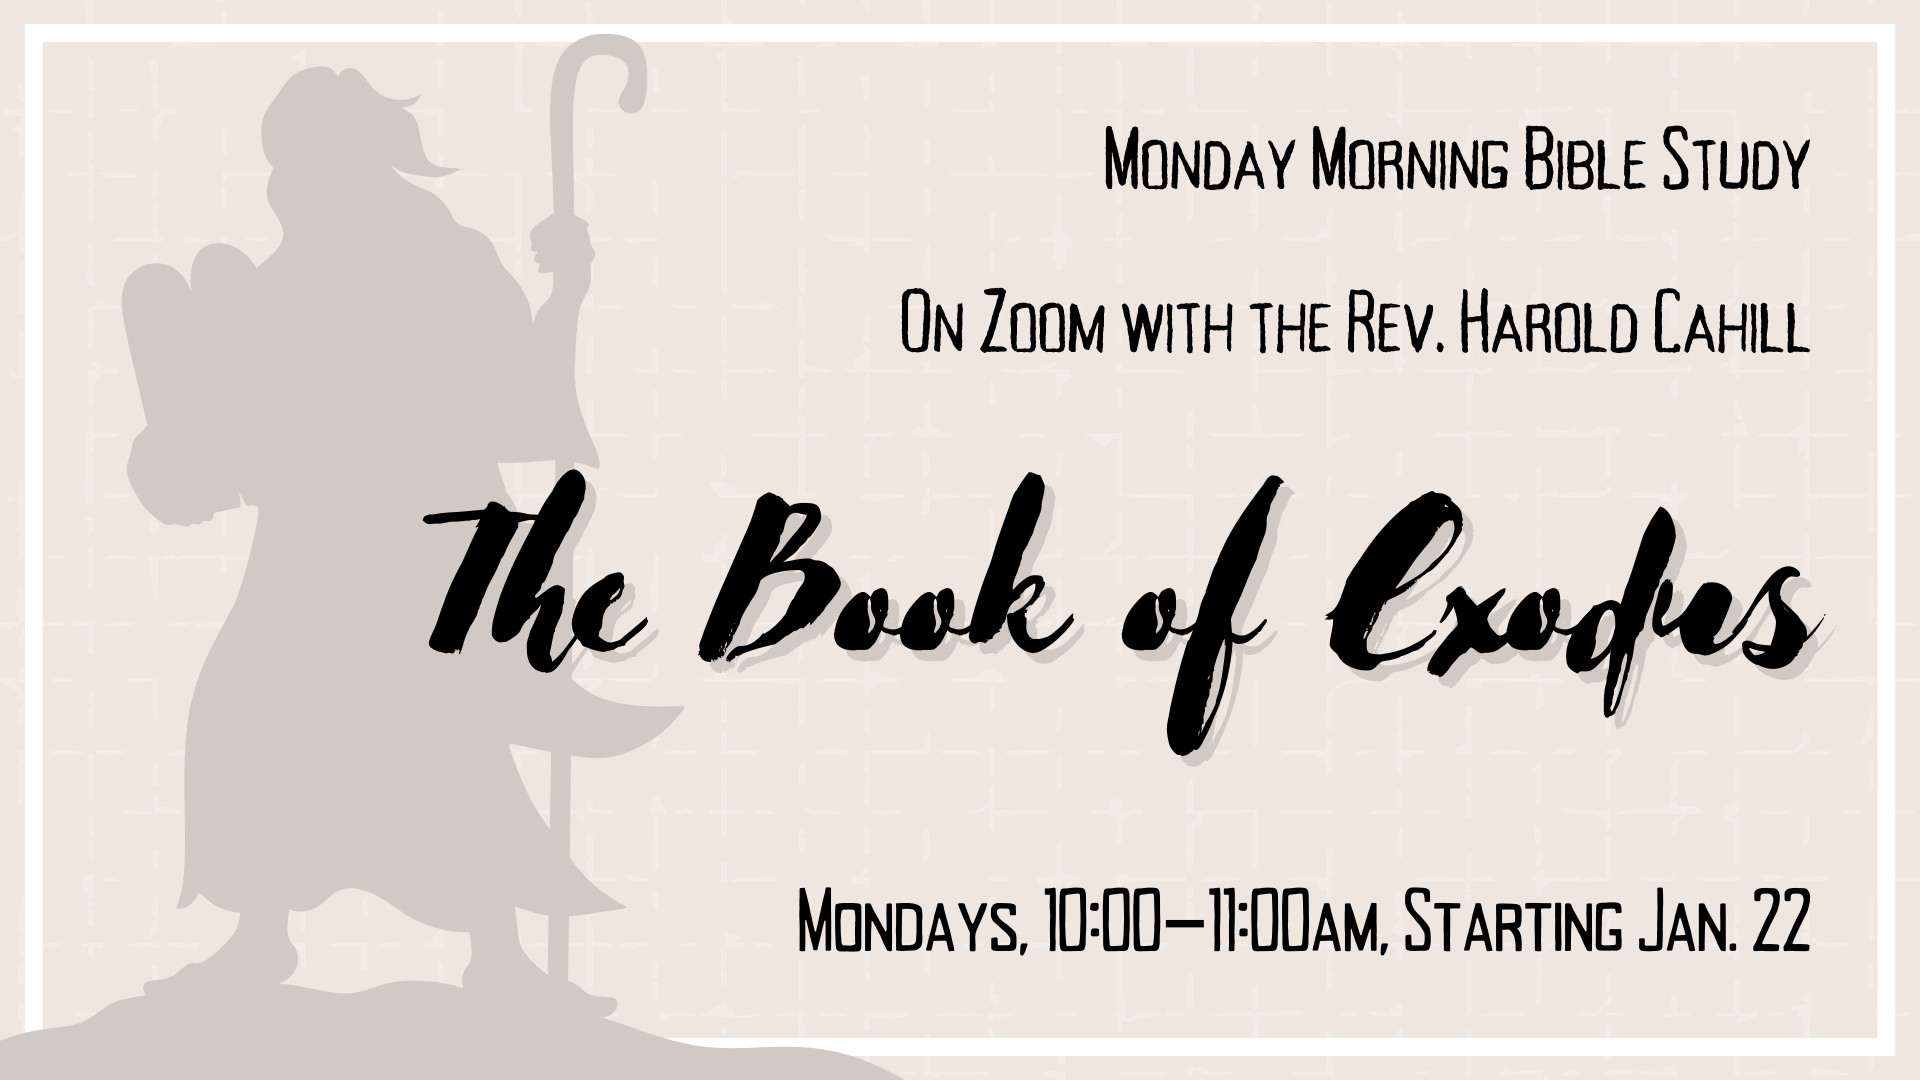 Graphic. Reads: Monday Morning Bible Study On Zoom with the Rev. Harold Cahill. Mondays, 10:00-11:00am, Starting Jan. 22